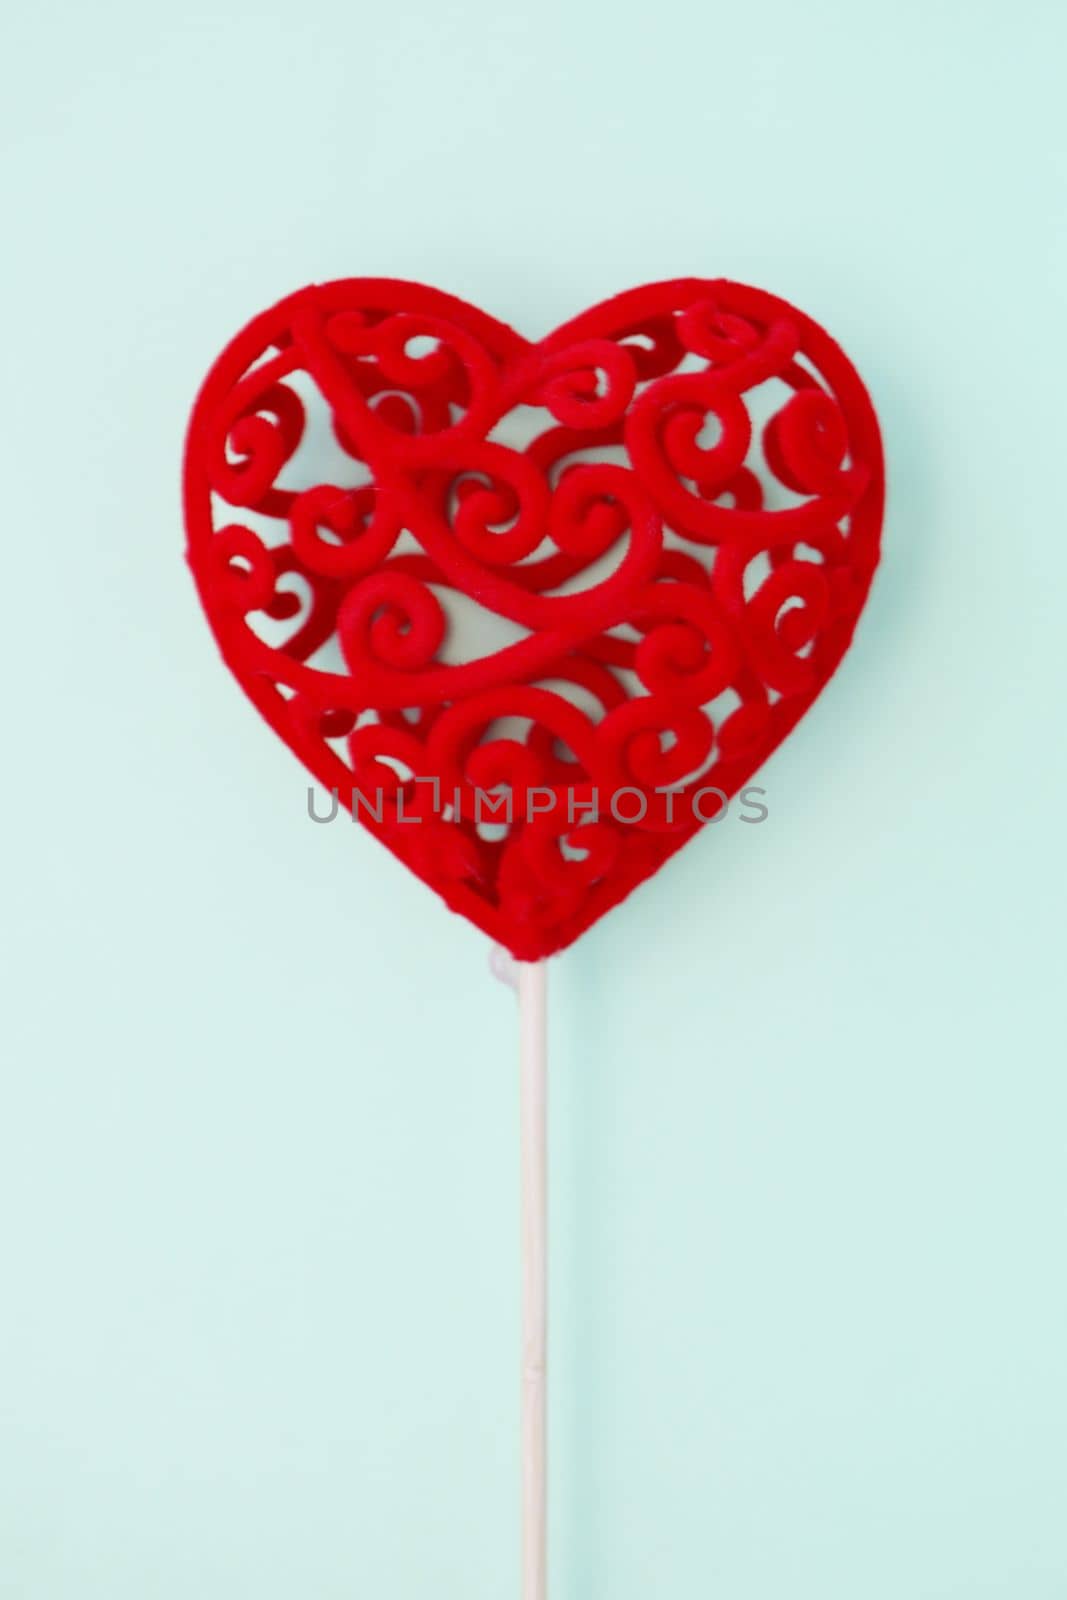 Red decorative gift heart on a stick on a pale blue background. by gelog67